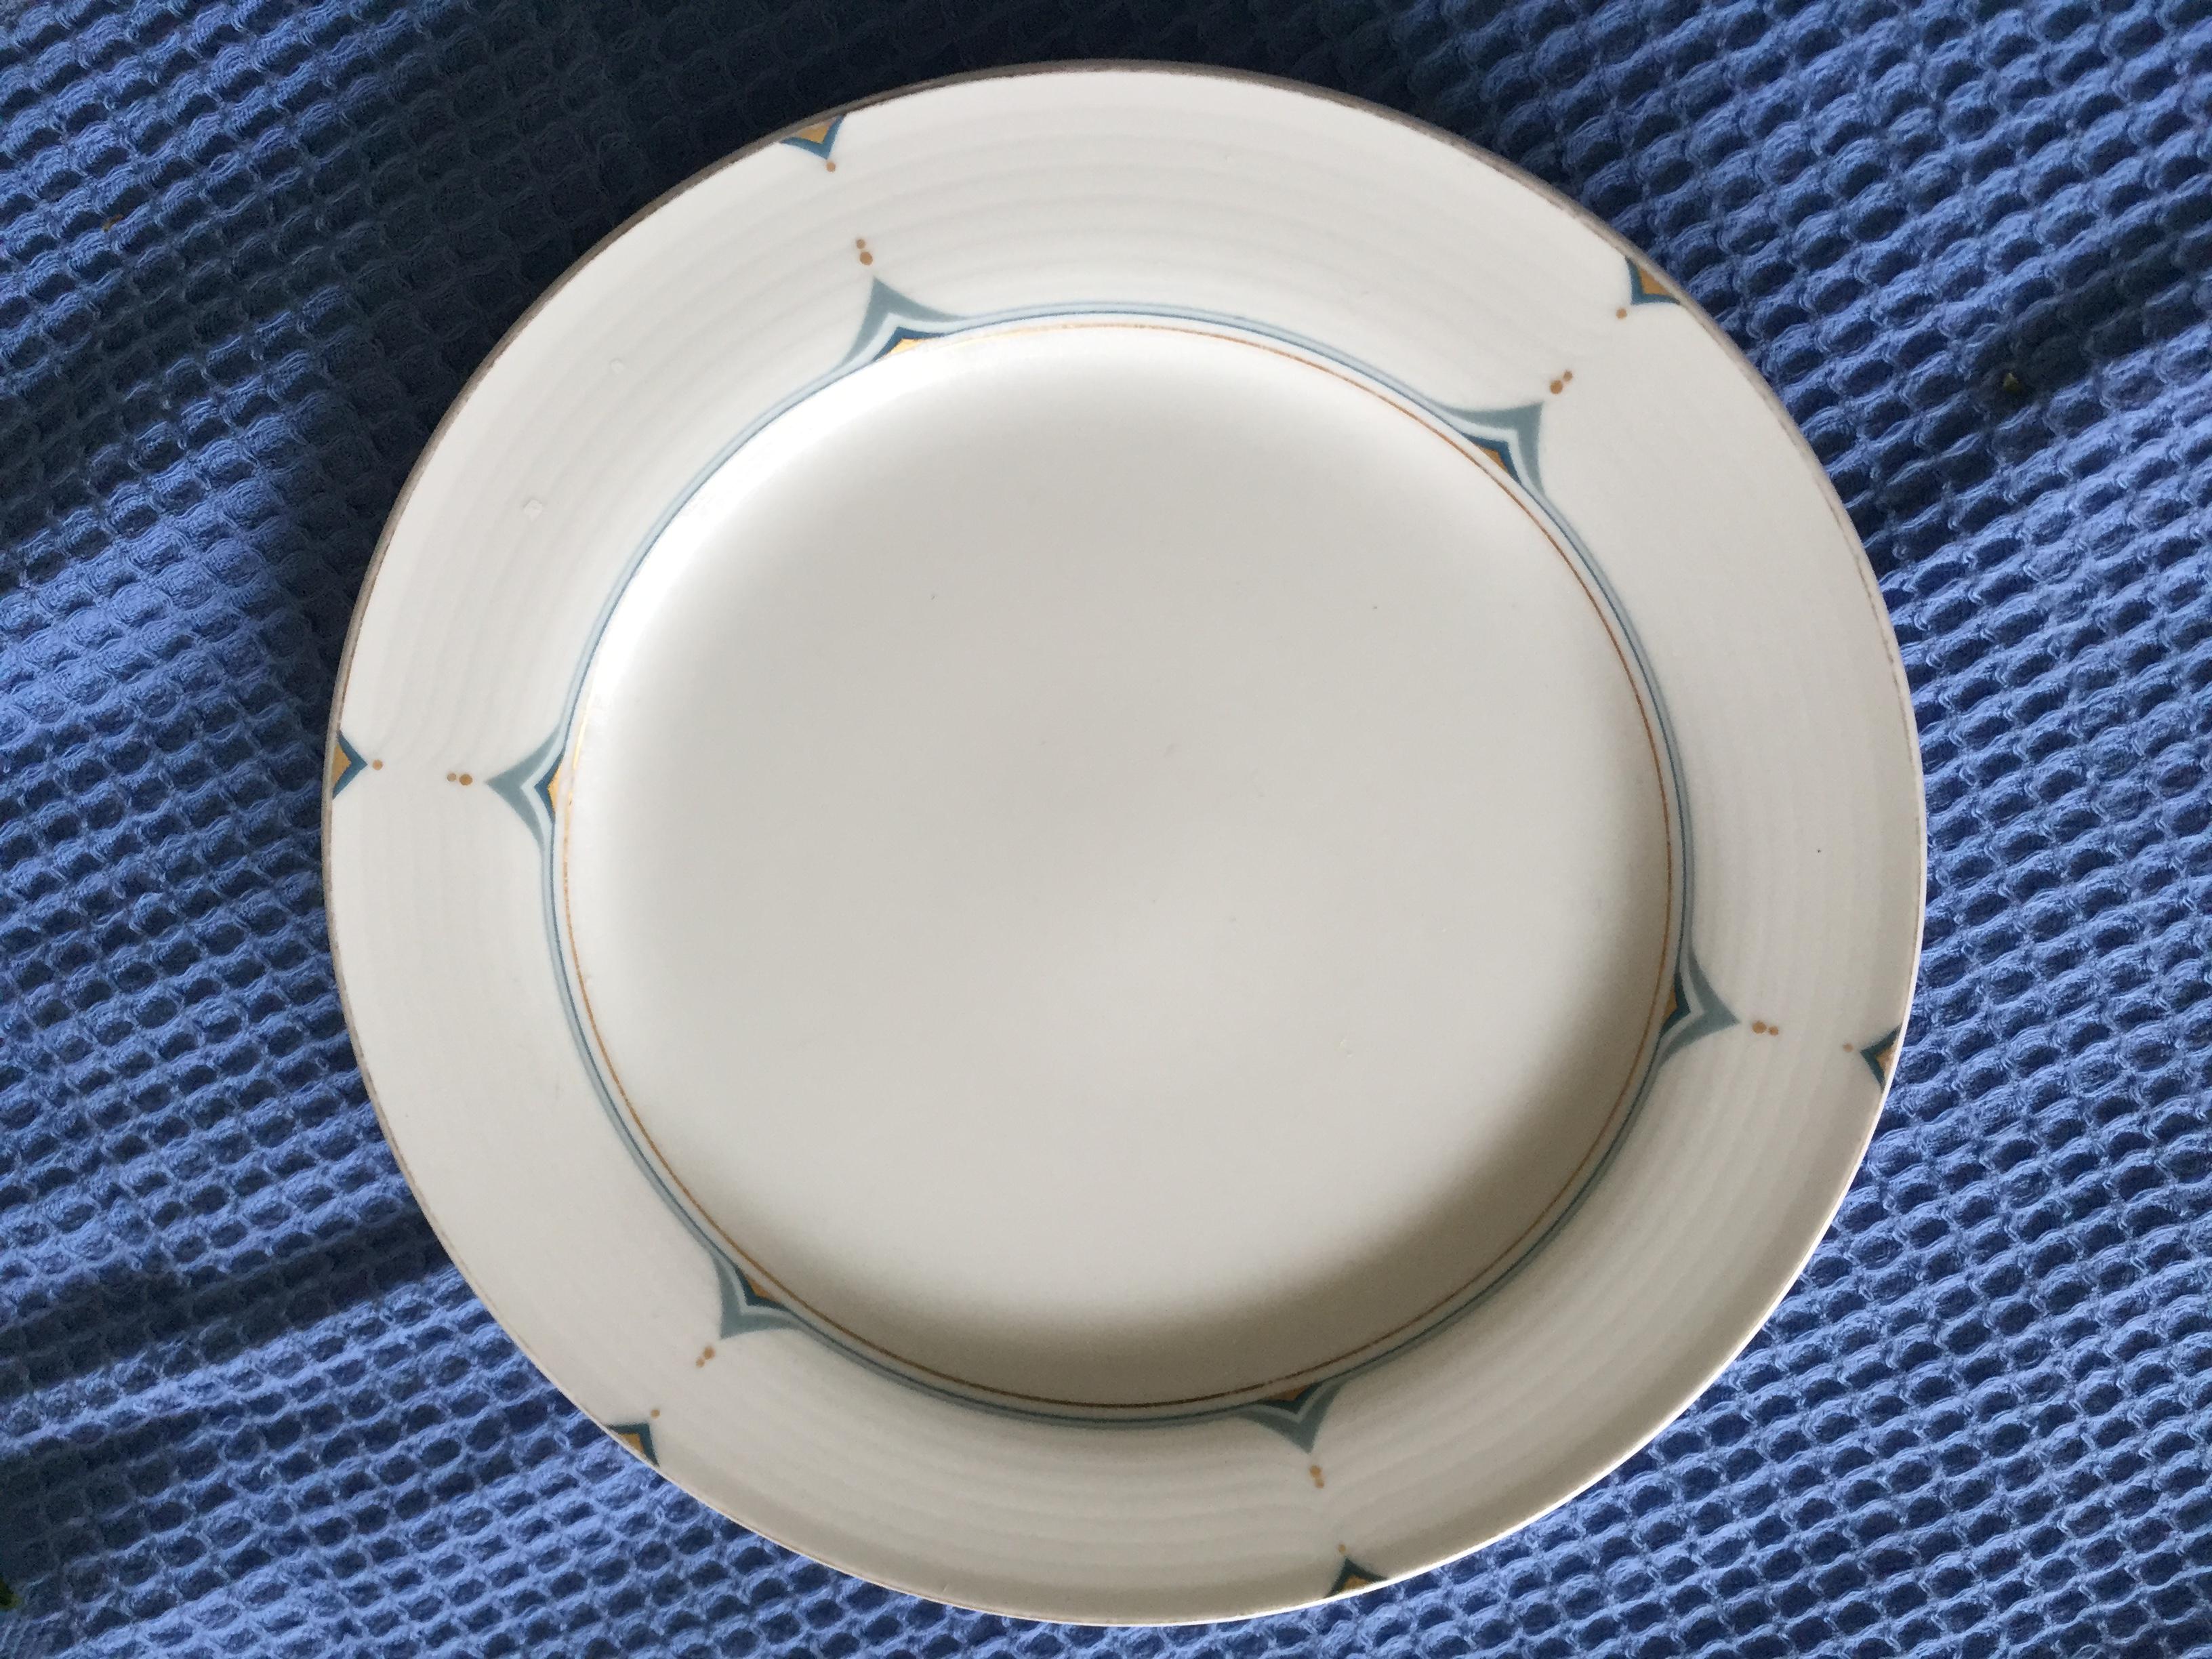 SOUVENIR CHINA PLATE FROM THE CRYSTAL CRUISES SHIPPING COMPANY 